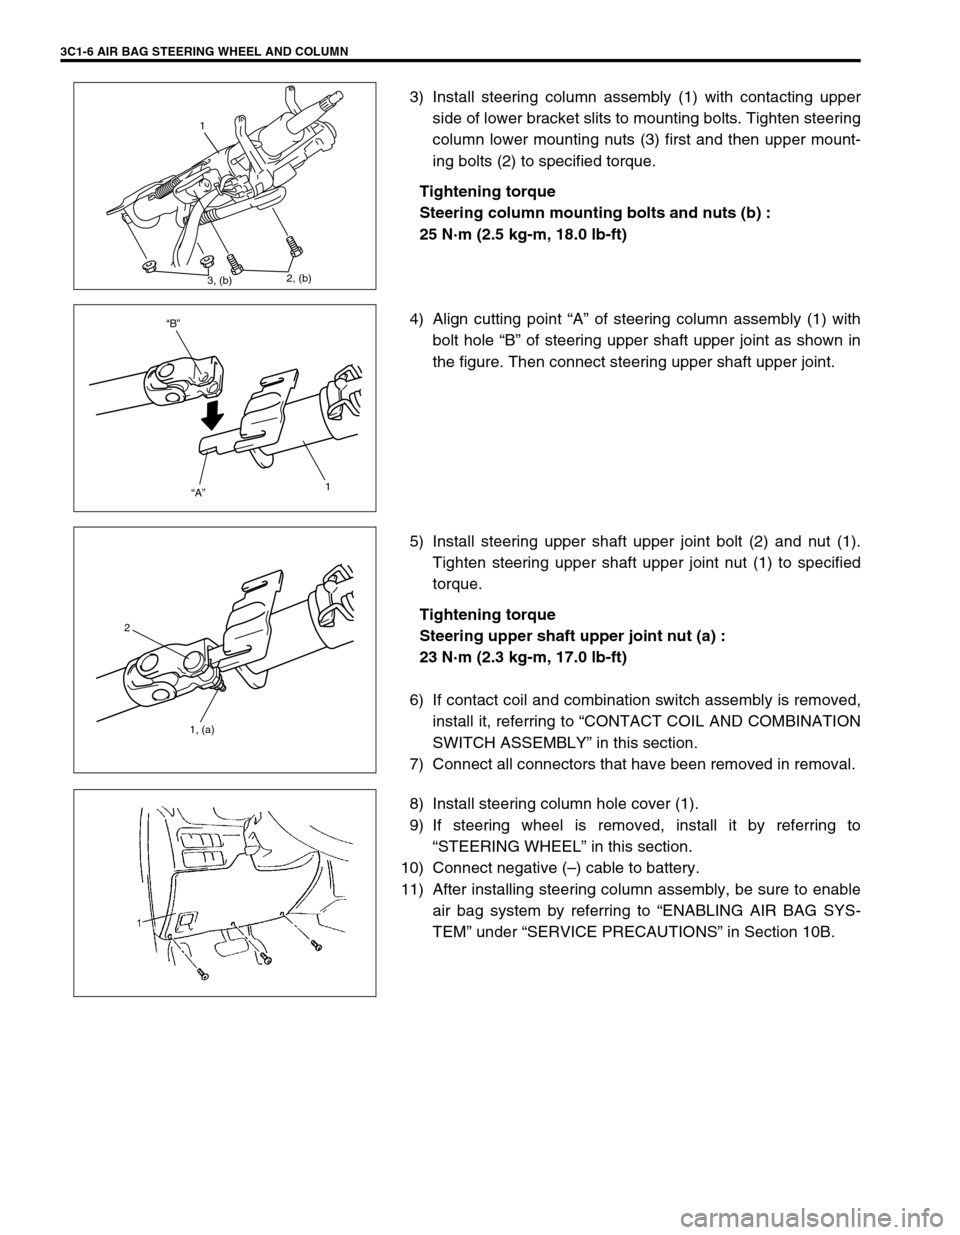 SUZUKI GRAND VITARA 1999 2.G Owners Manual 3C1-6 AIR BAG STEERING WHEEL AND COLUMN
3) Install steering column assembly (1) with contacting upper
side of lower bracket slits to mounting bolts. Tighten steering
column lower mounting nuts (3) fir